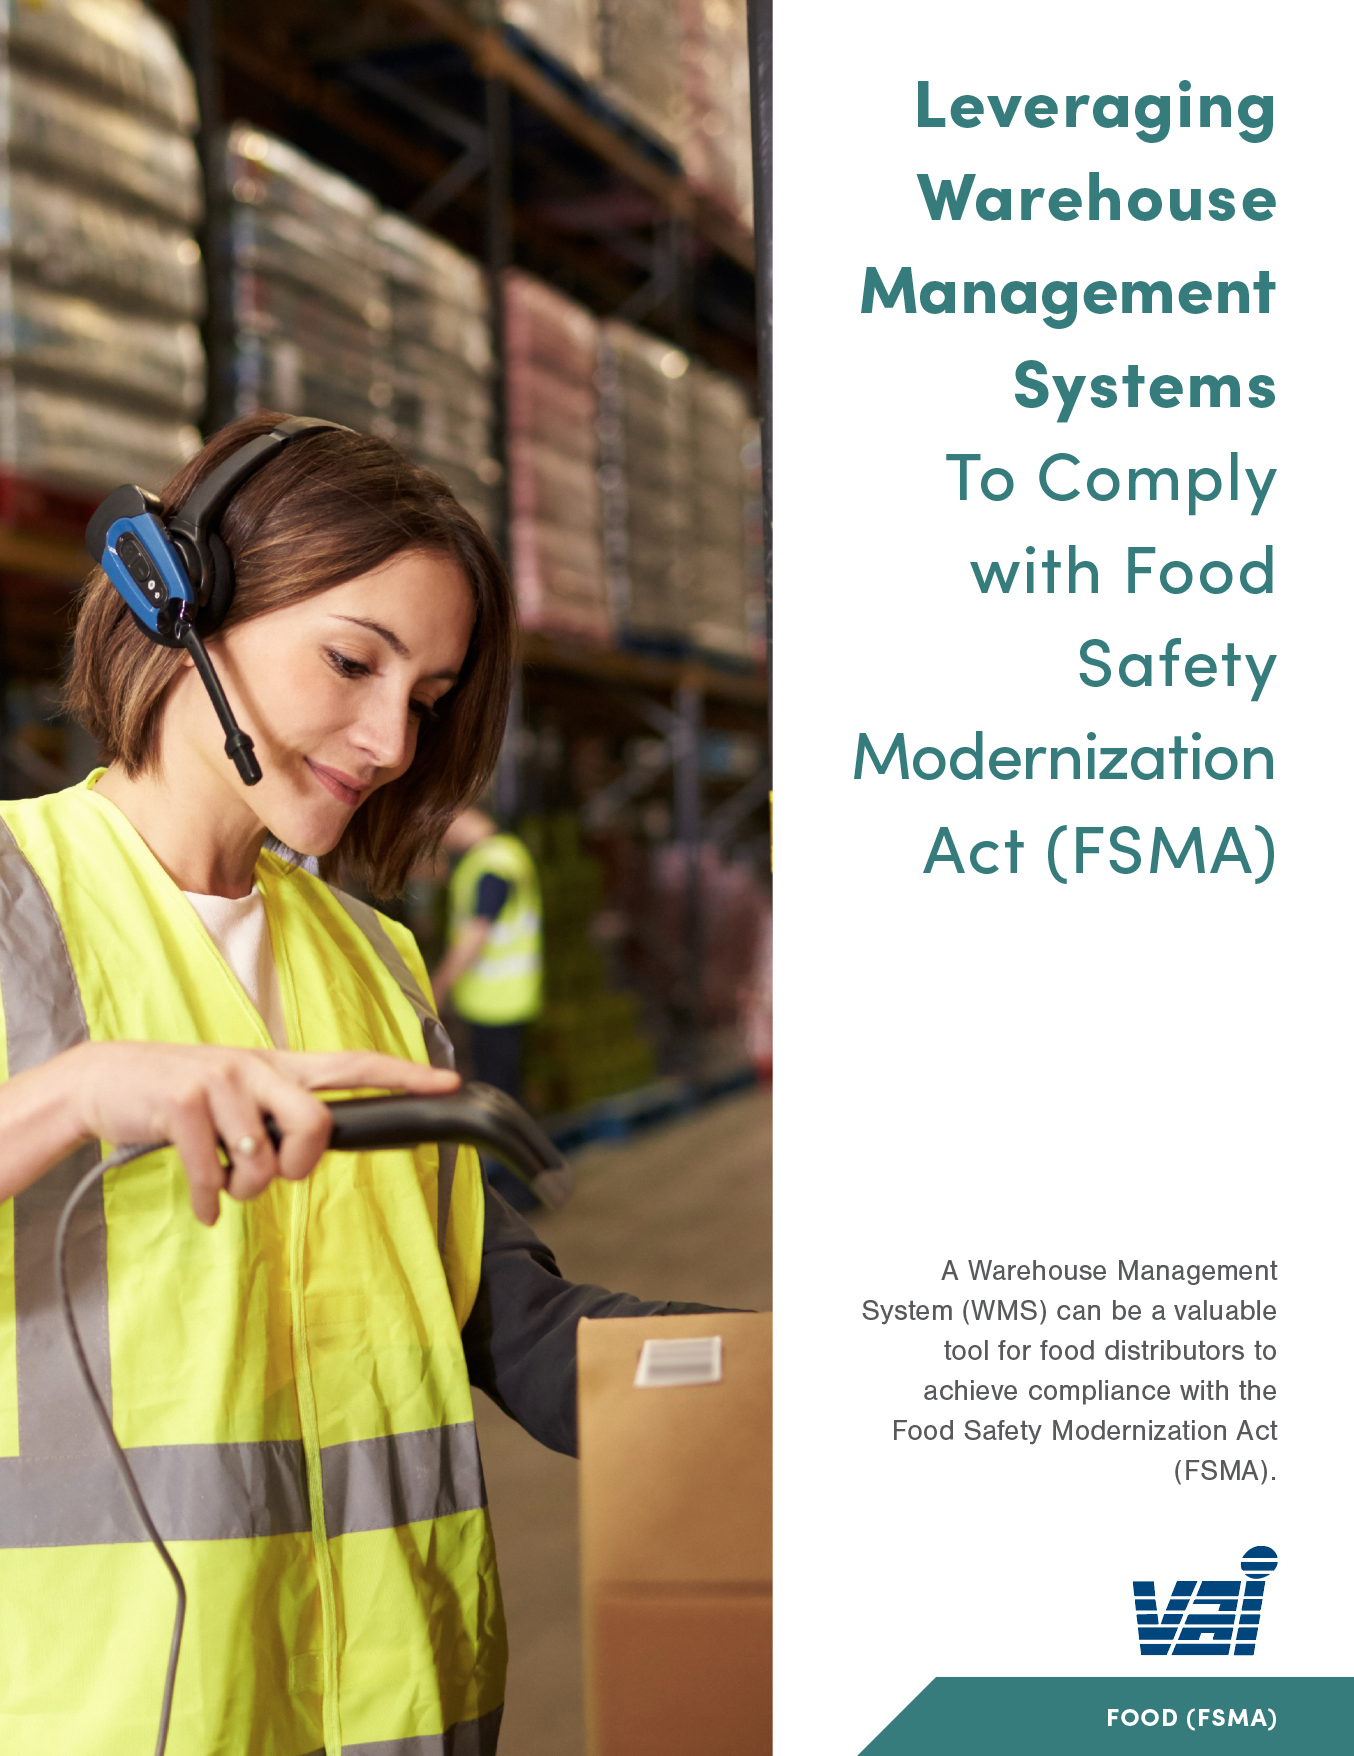 Leveraging Warehouse Management Systems to Comply with Food Safety Modernization Act